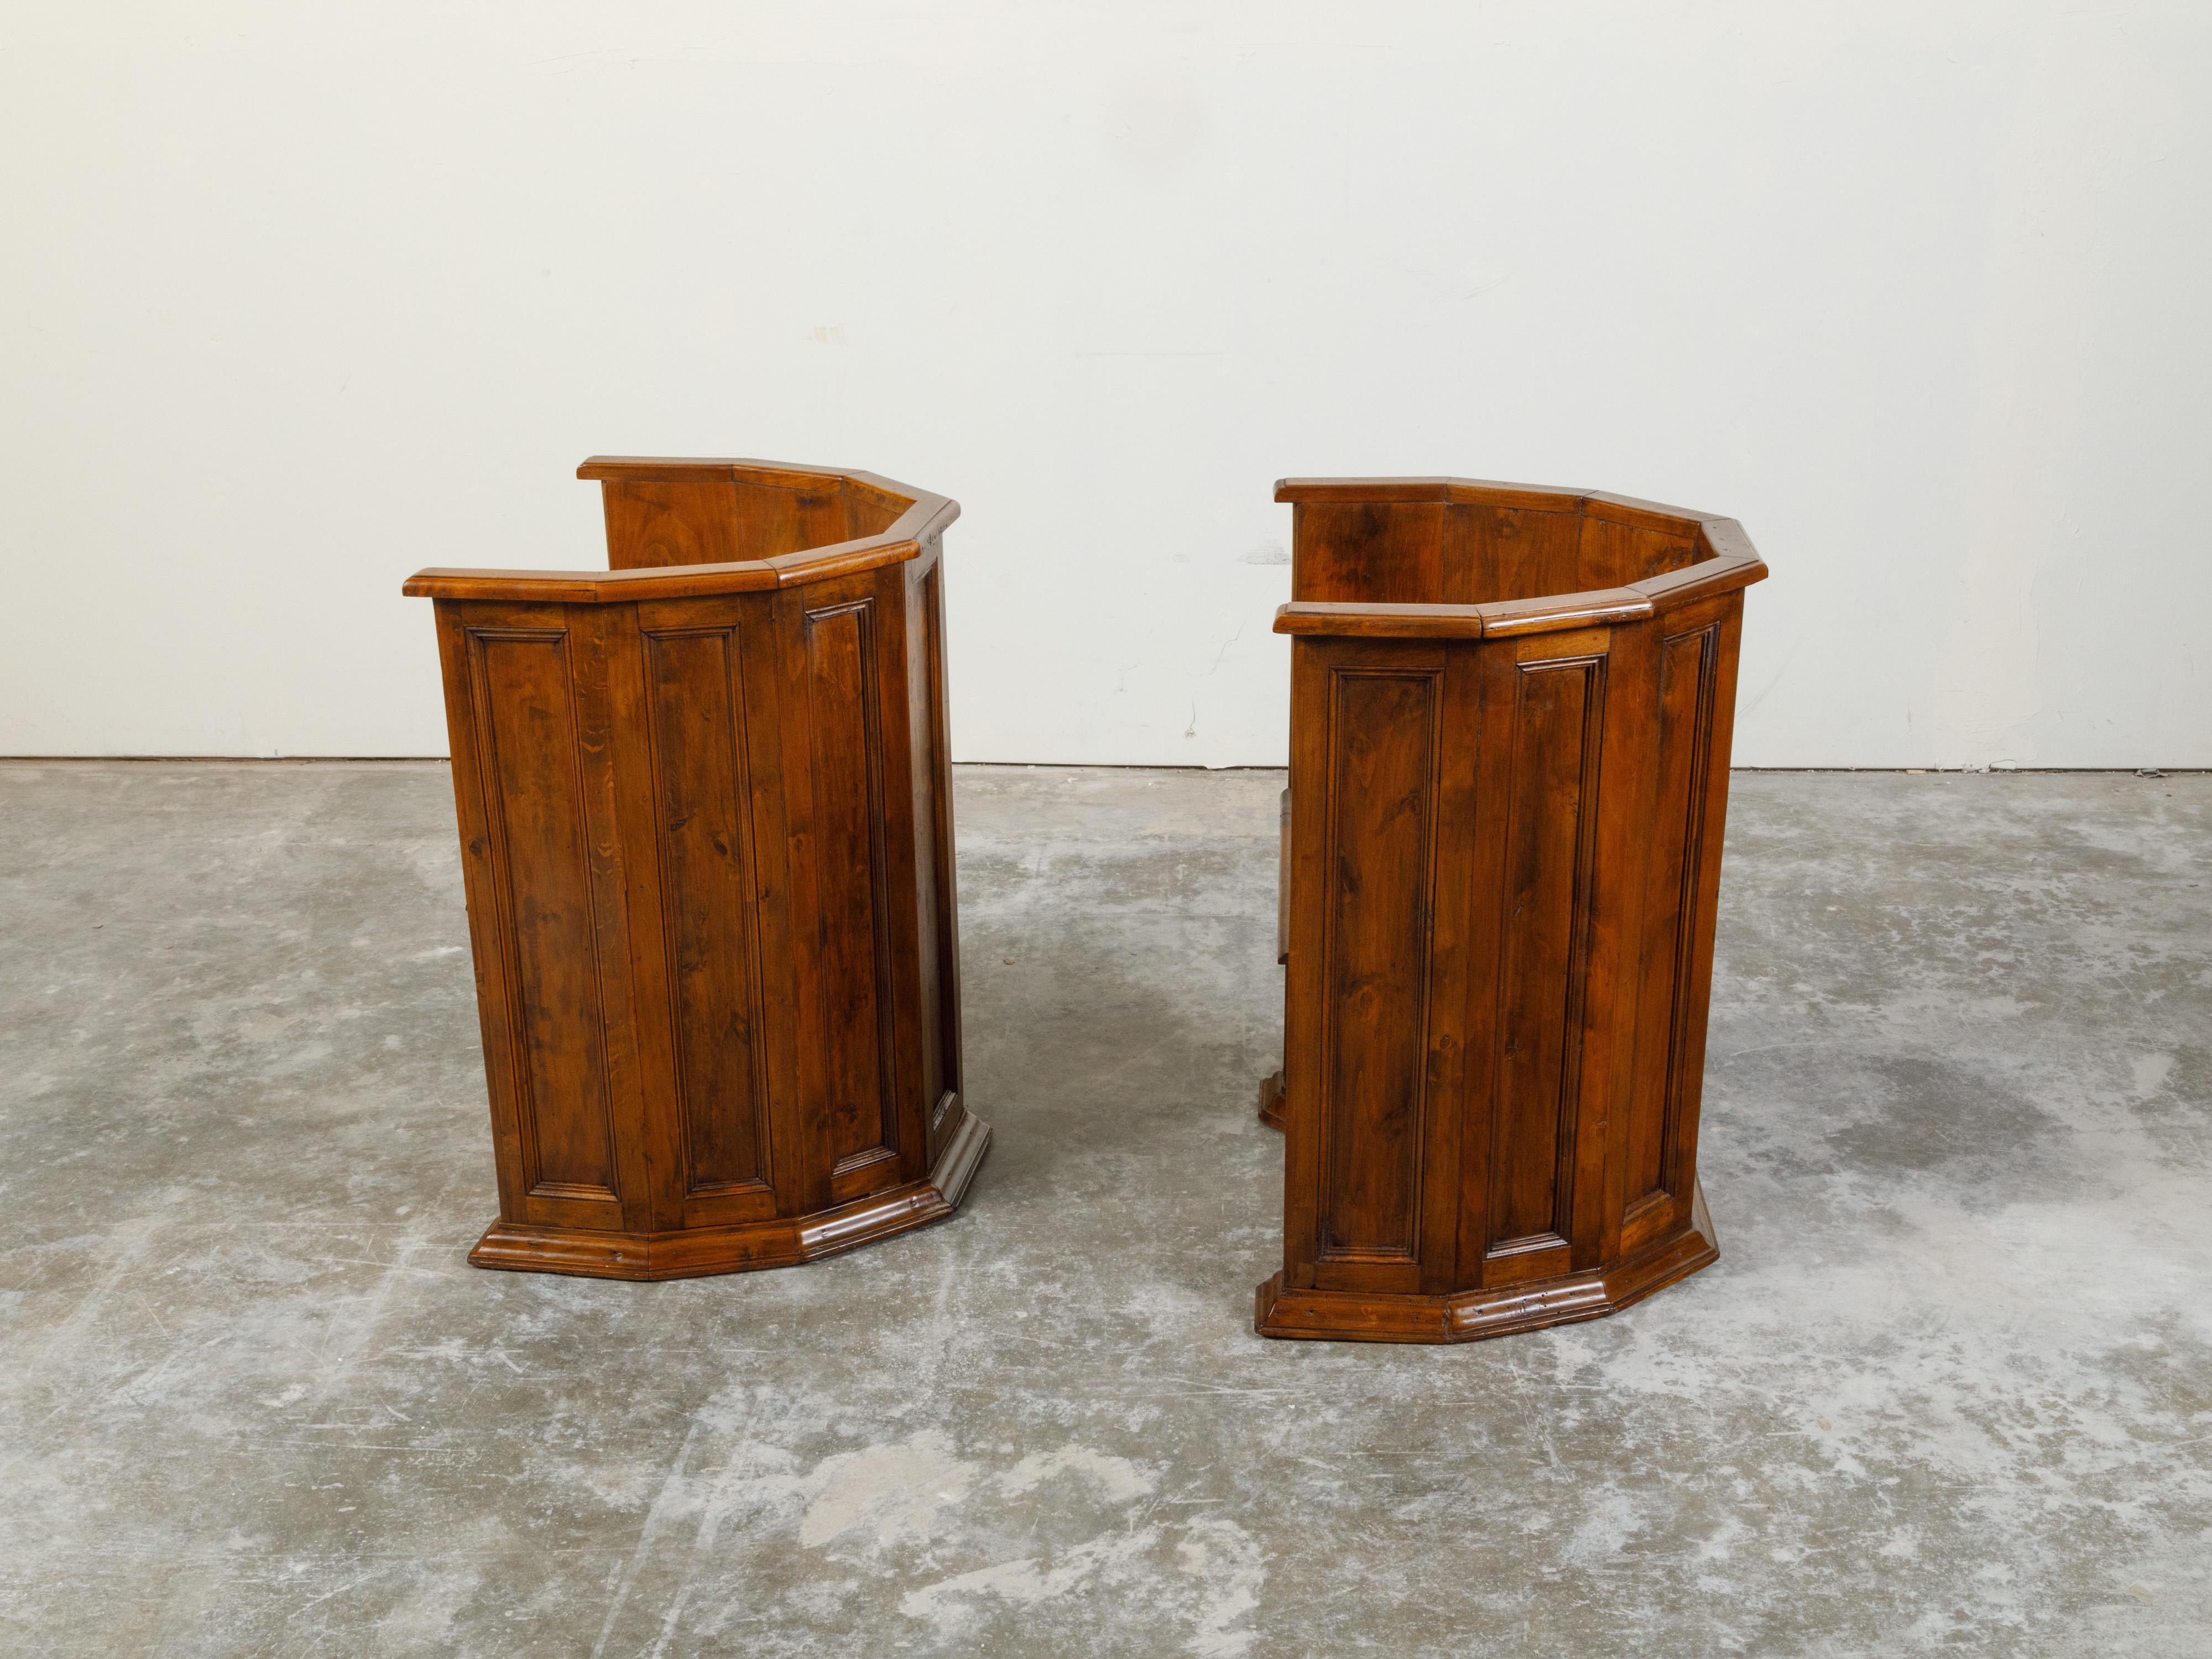 Pair of Italian 19th Century Renaissance Style Wooden Chairs with Lower Doors For Sale 2